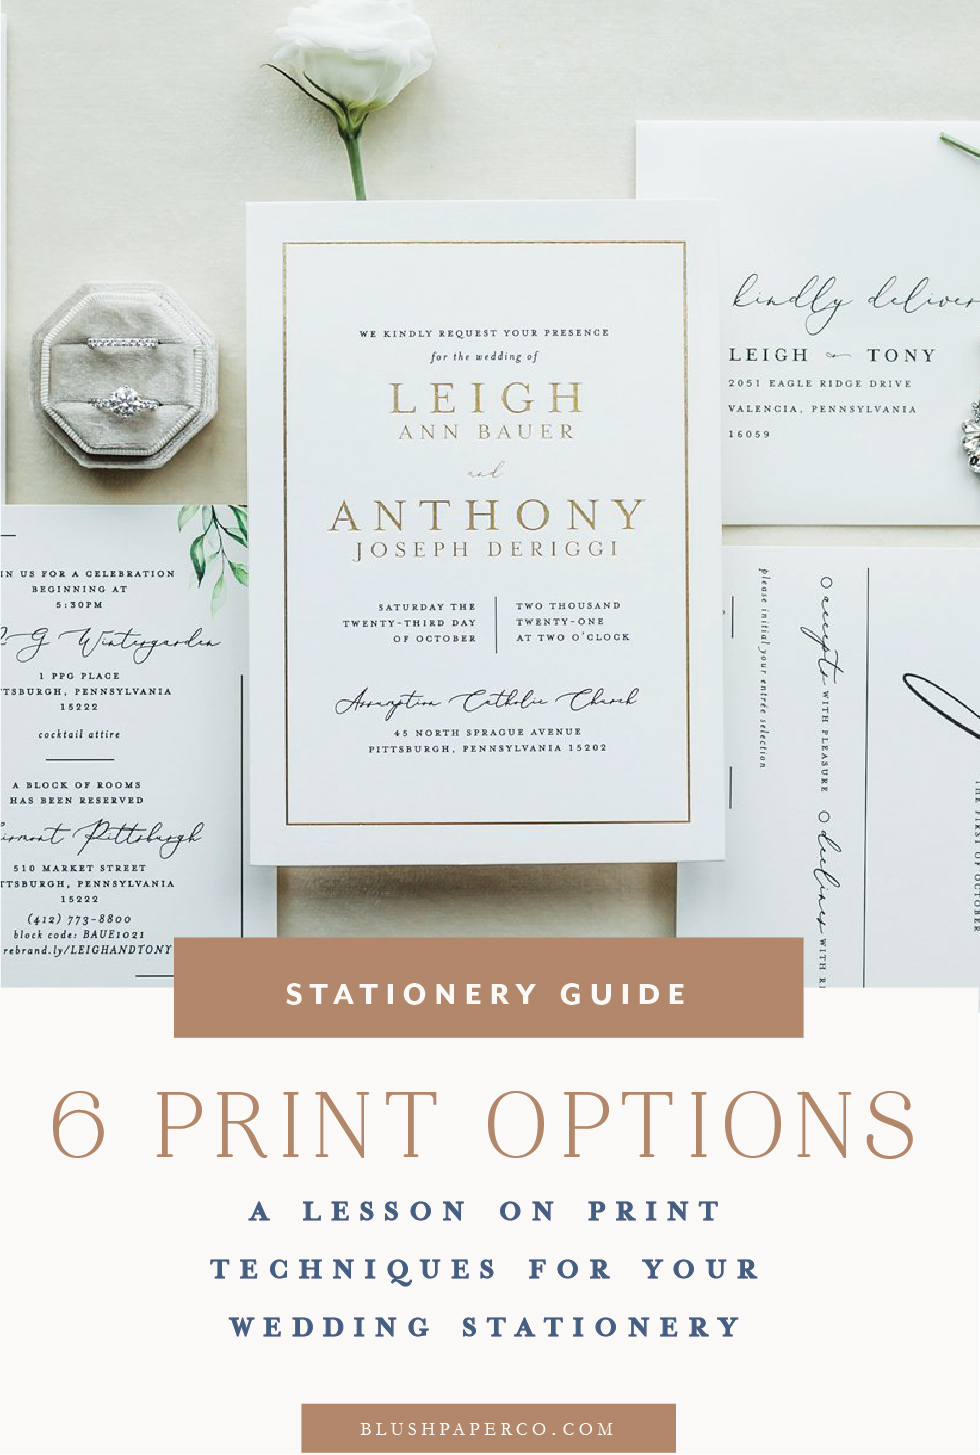 The Ultimate Guide to Wedding Stationery Printing Techniques